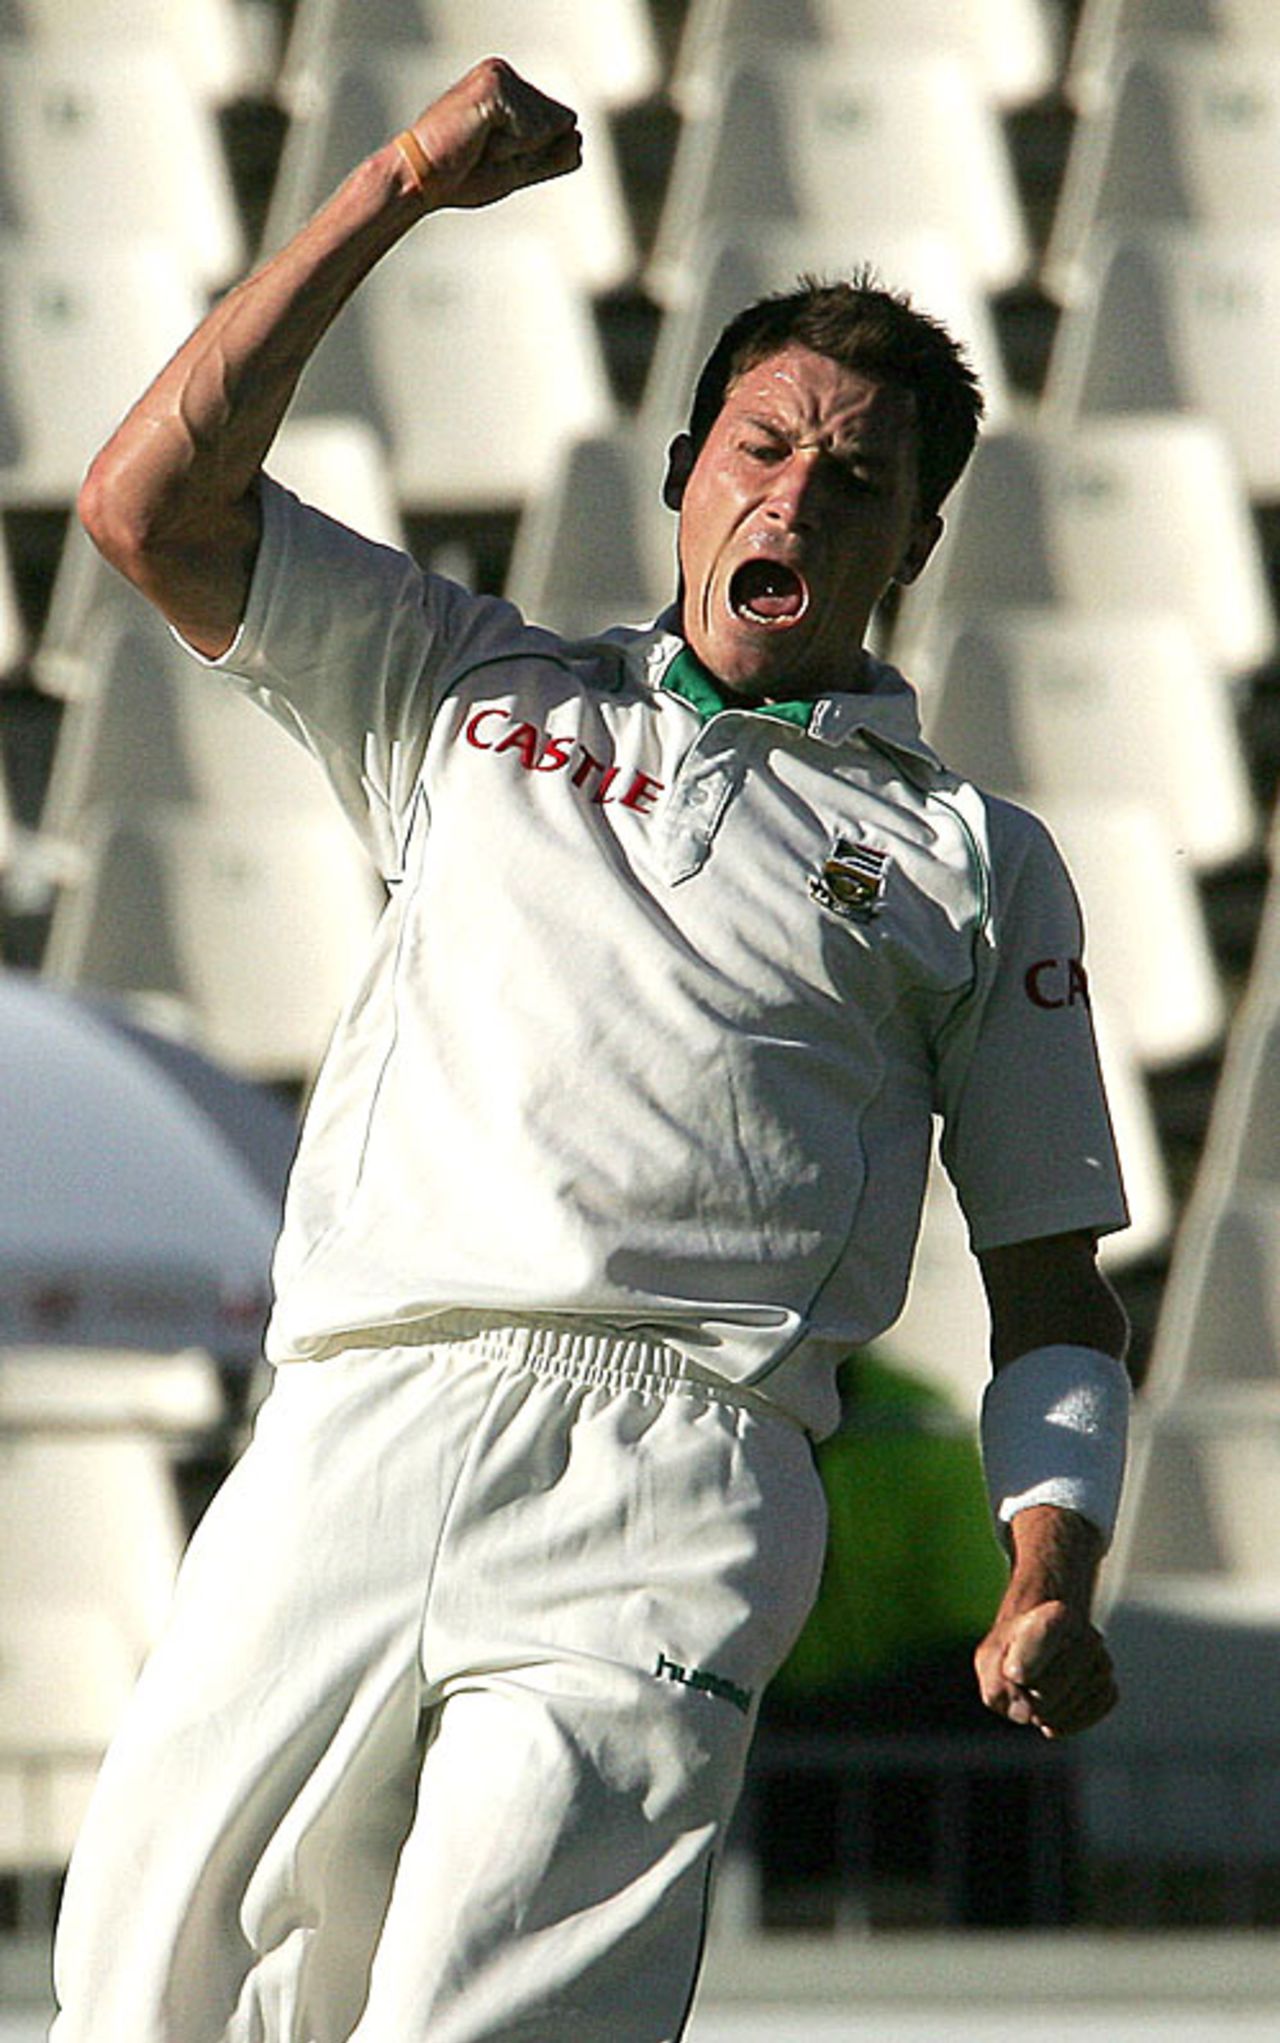 Dale Steyn roars his delight after picking up an early New Zealand wicket, 1st Test, Johannesburg, 3rd day, November 10, 2007